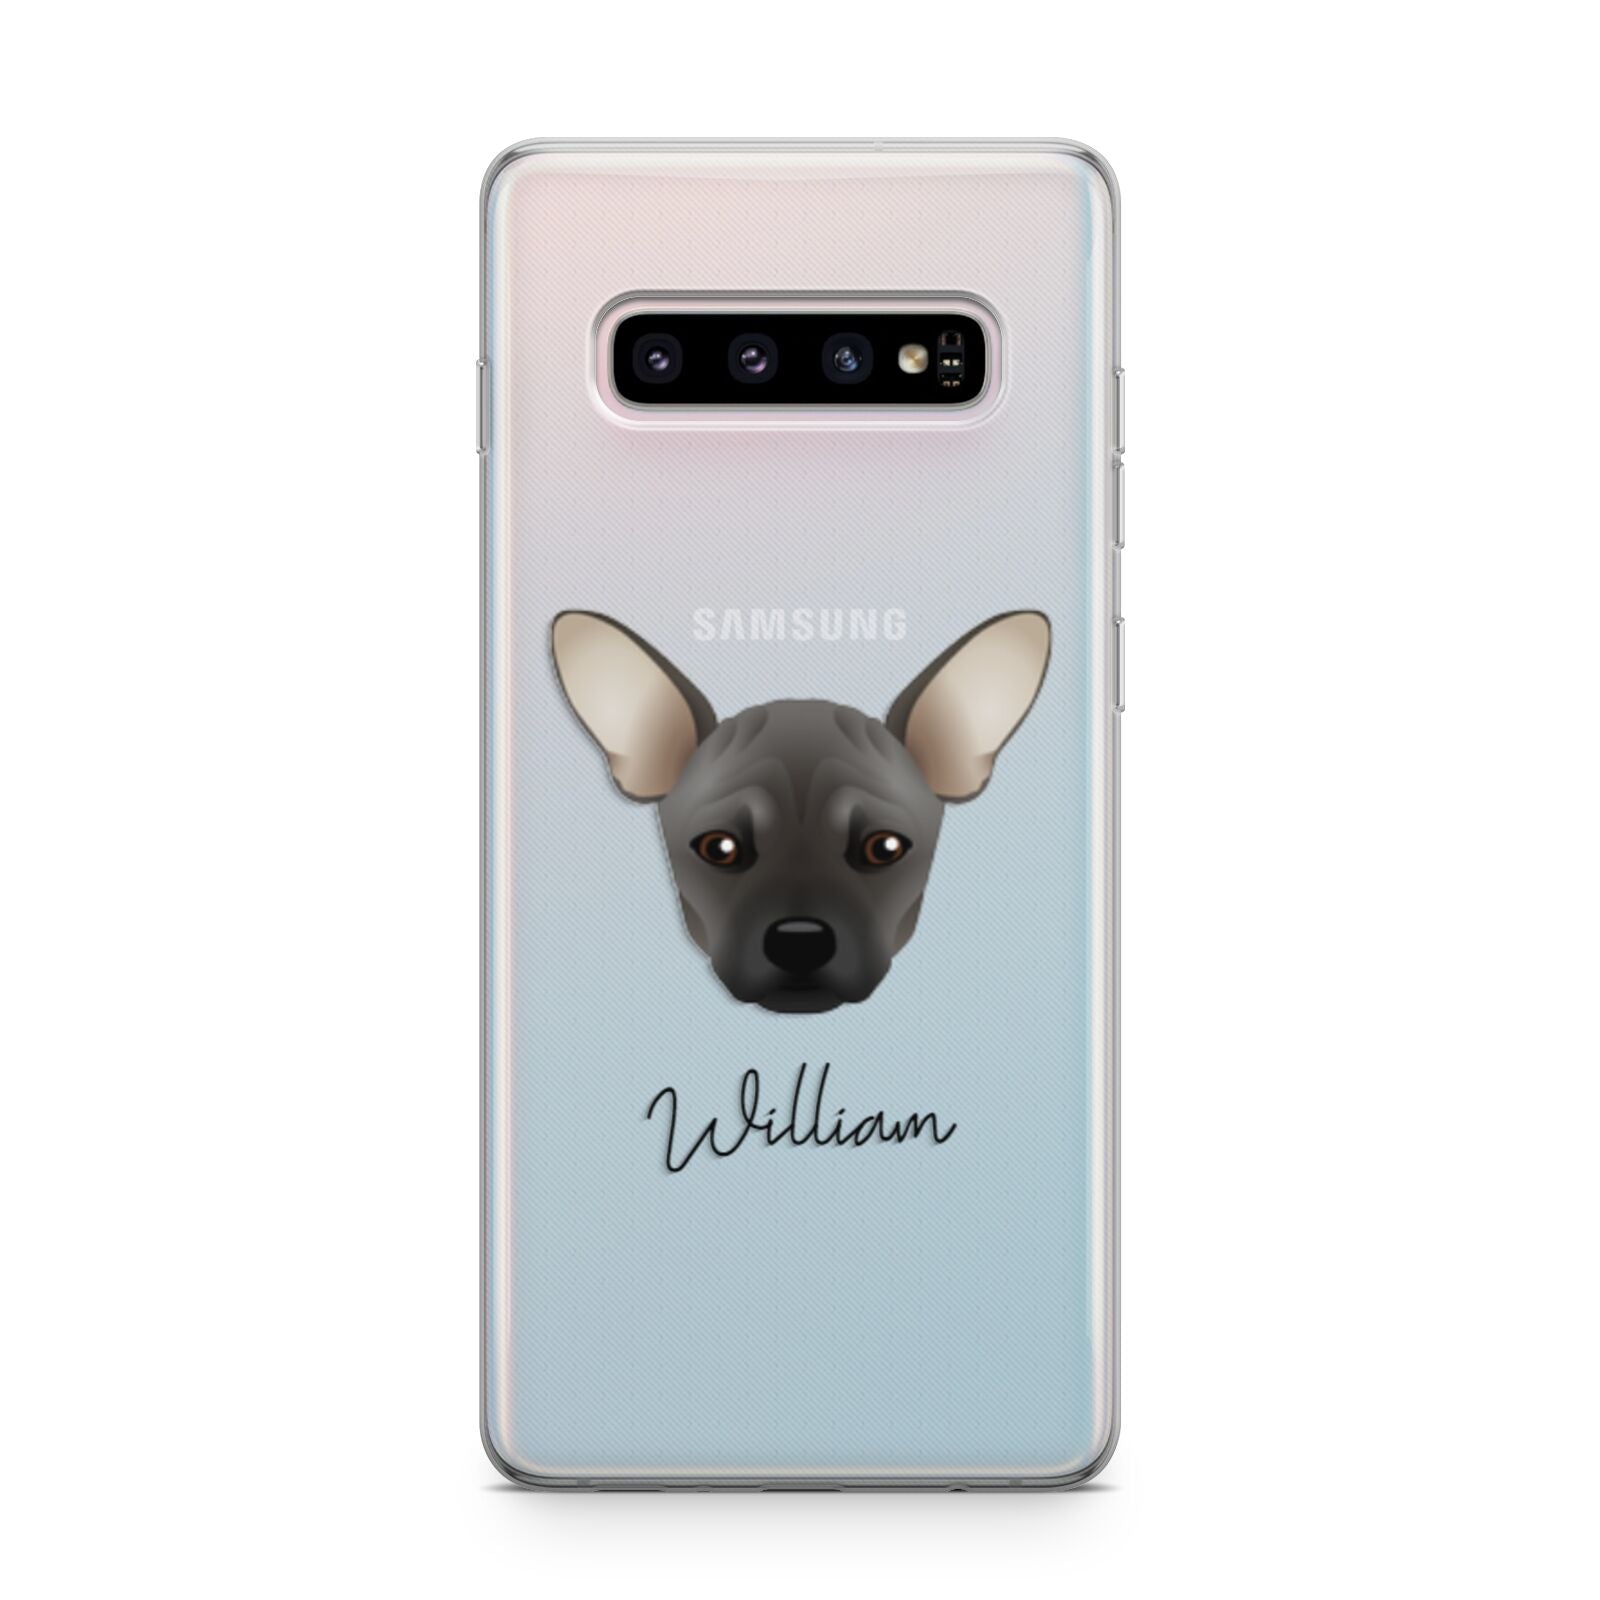 French Pin Personalised Samsung Galaxy S10 Plus Case